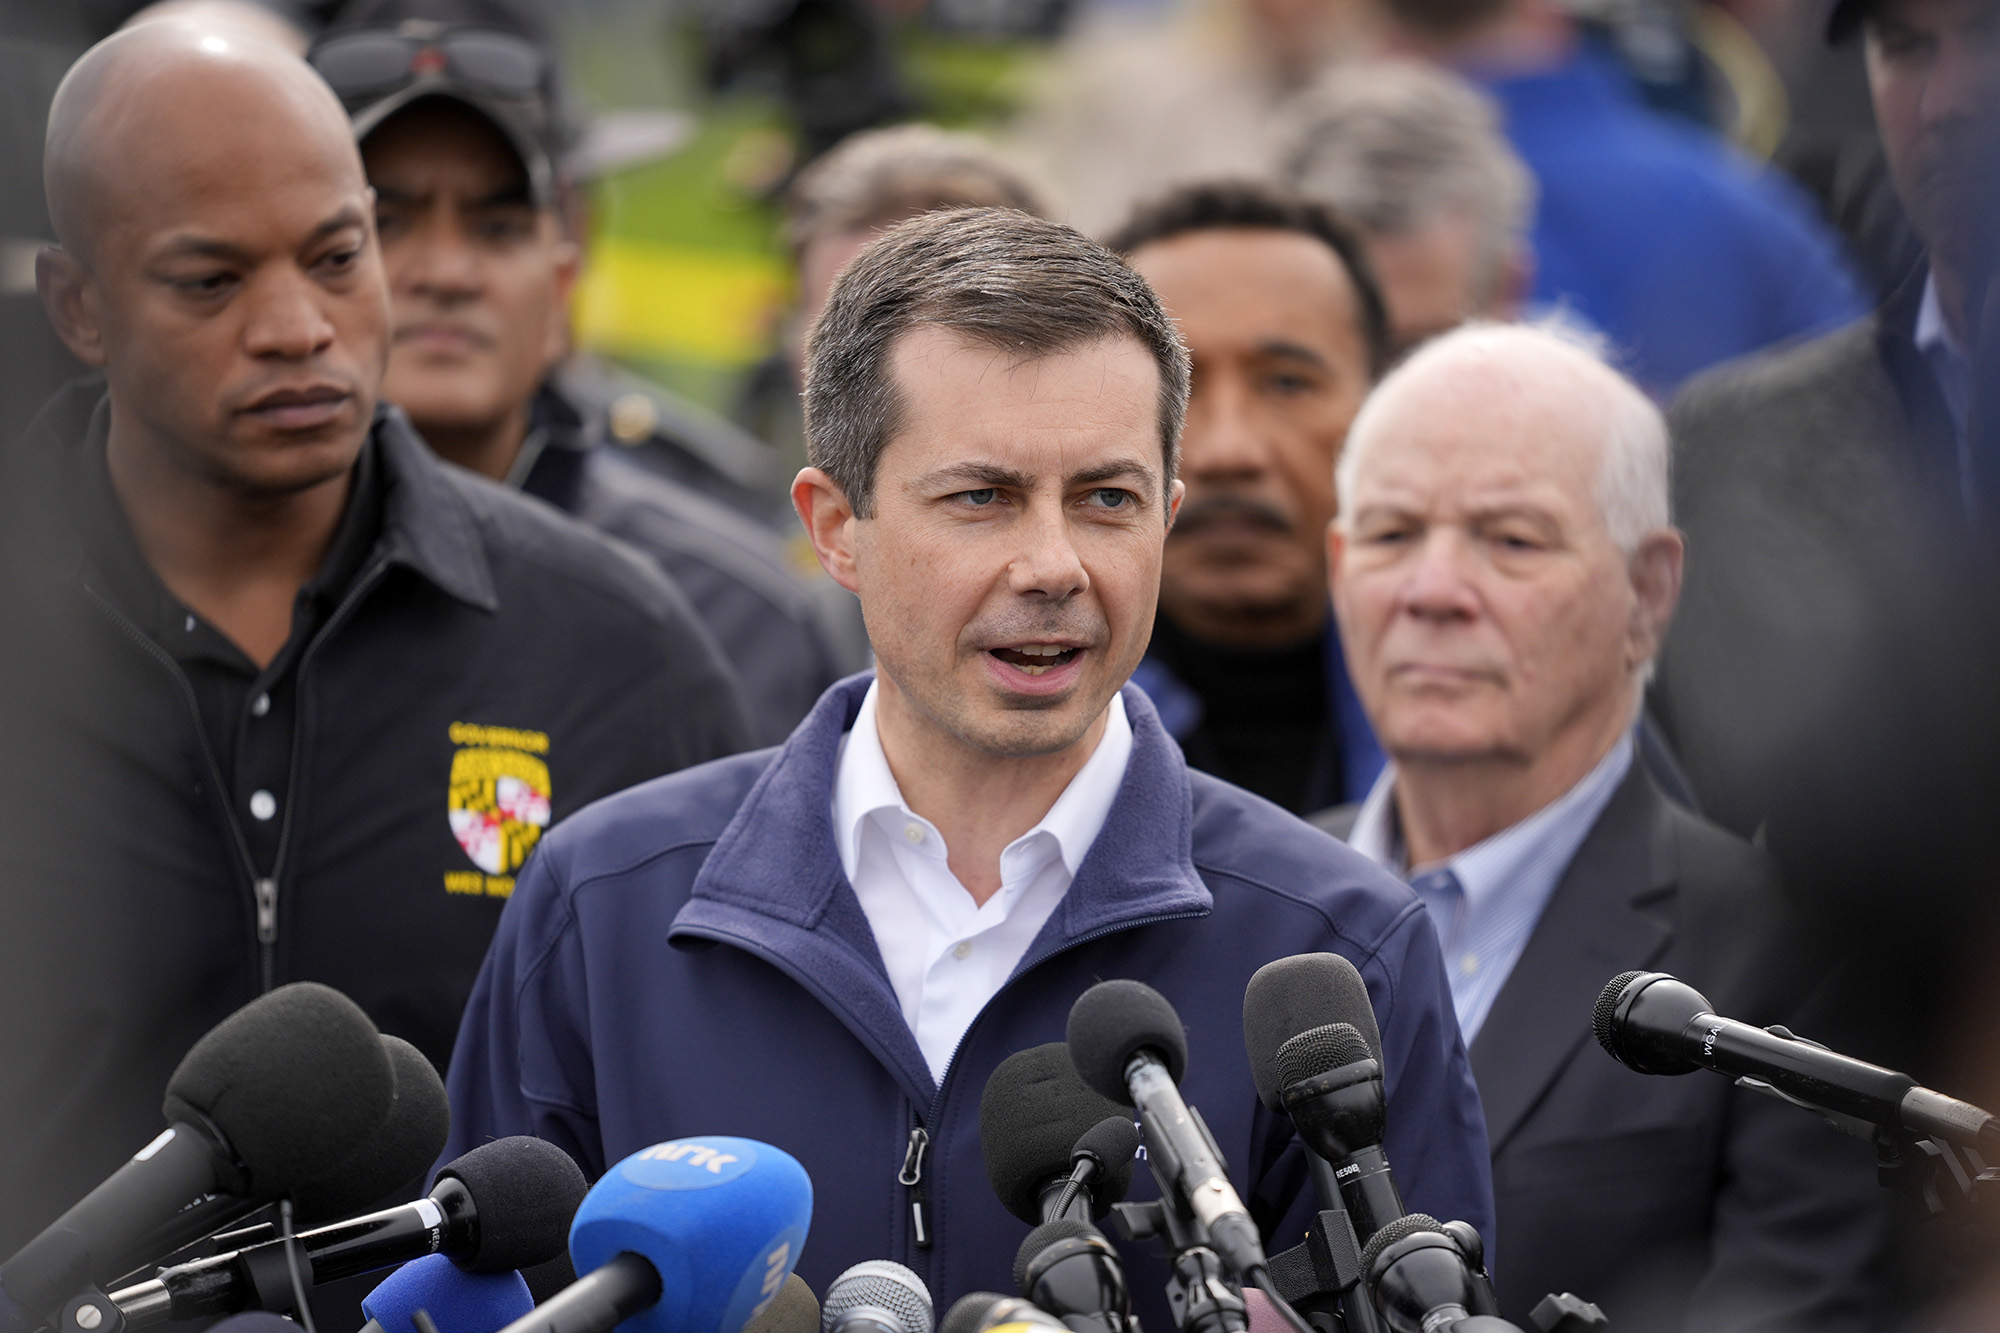 Transportation Secretary Pete Buttigieg, center, speaks during a news conference near the scene where a container ship collided with a support on the Francis Scott Key Bridge, Baltimore, on March 26.